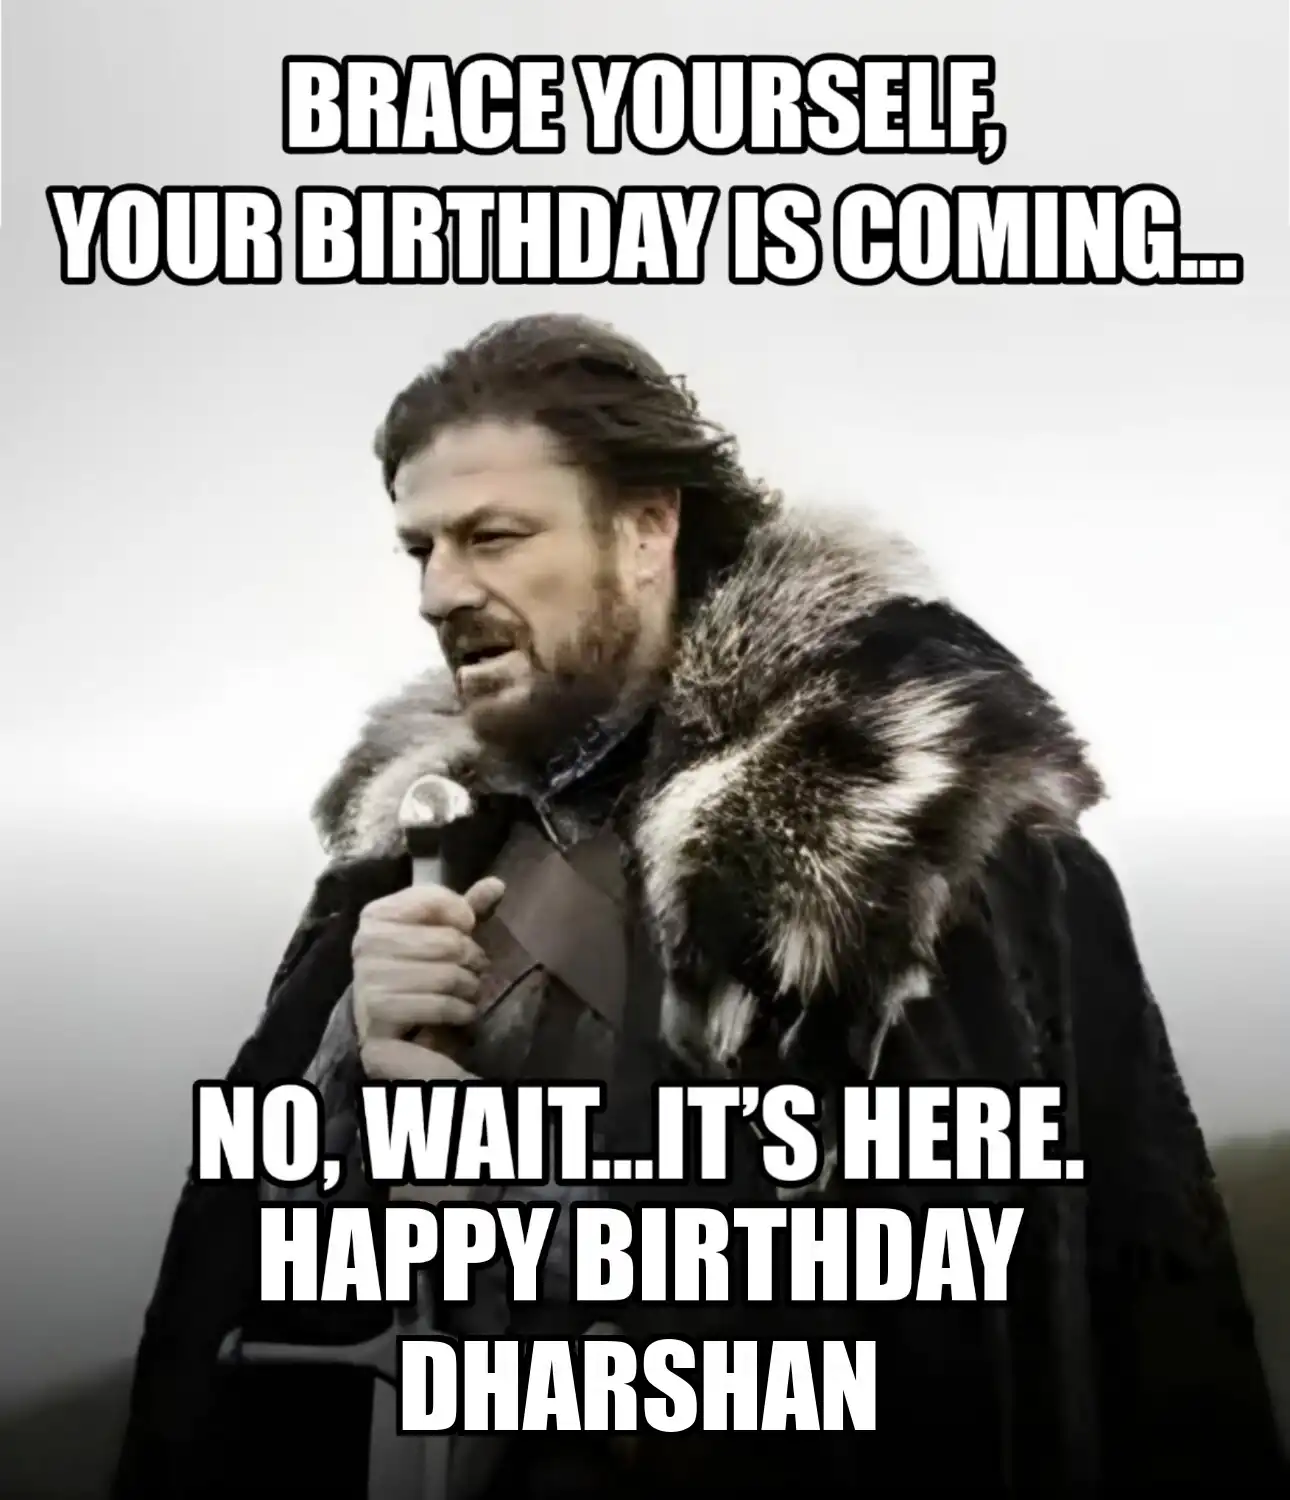 Happy Birthday Dharshan Brace Yourself Your Birthday Is Coming Meme